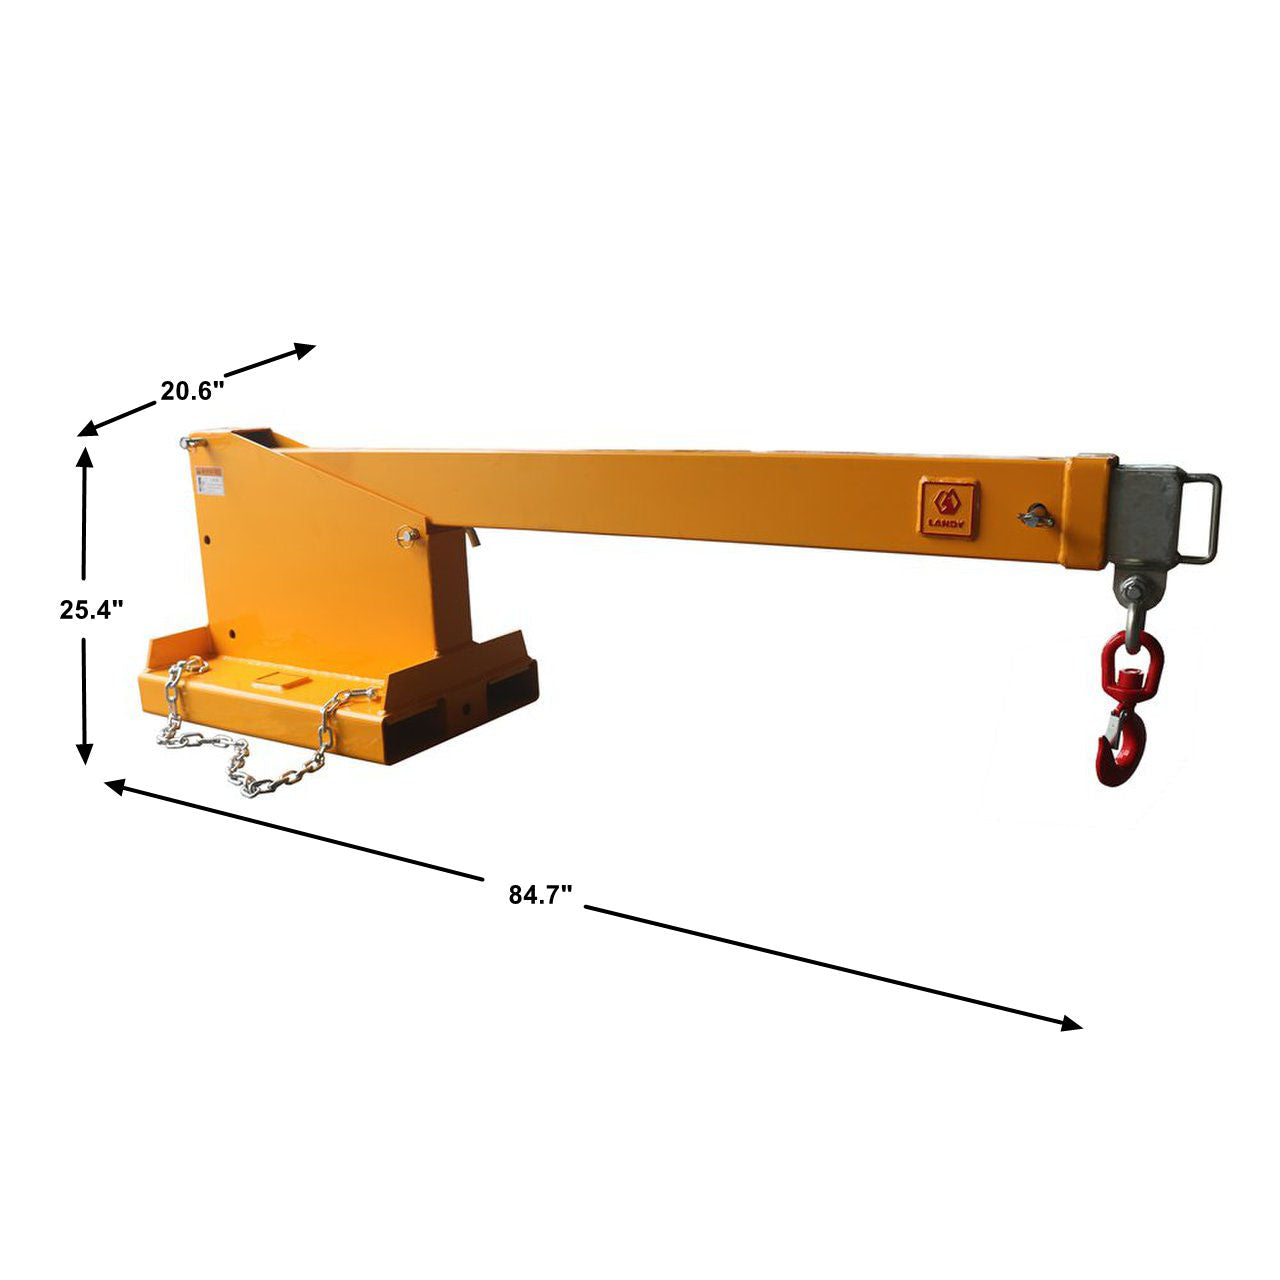 Landy Attachments Fork Mounted Telescoping Crane Jib Boom, Forklift Jib Boom Crane, Forklift Mobile Crane, Forklift Boom Attachment